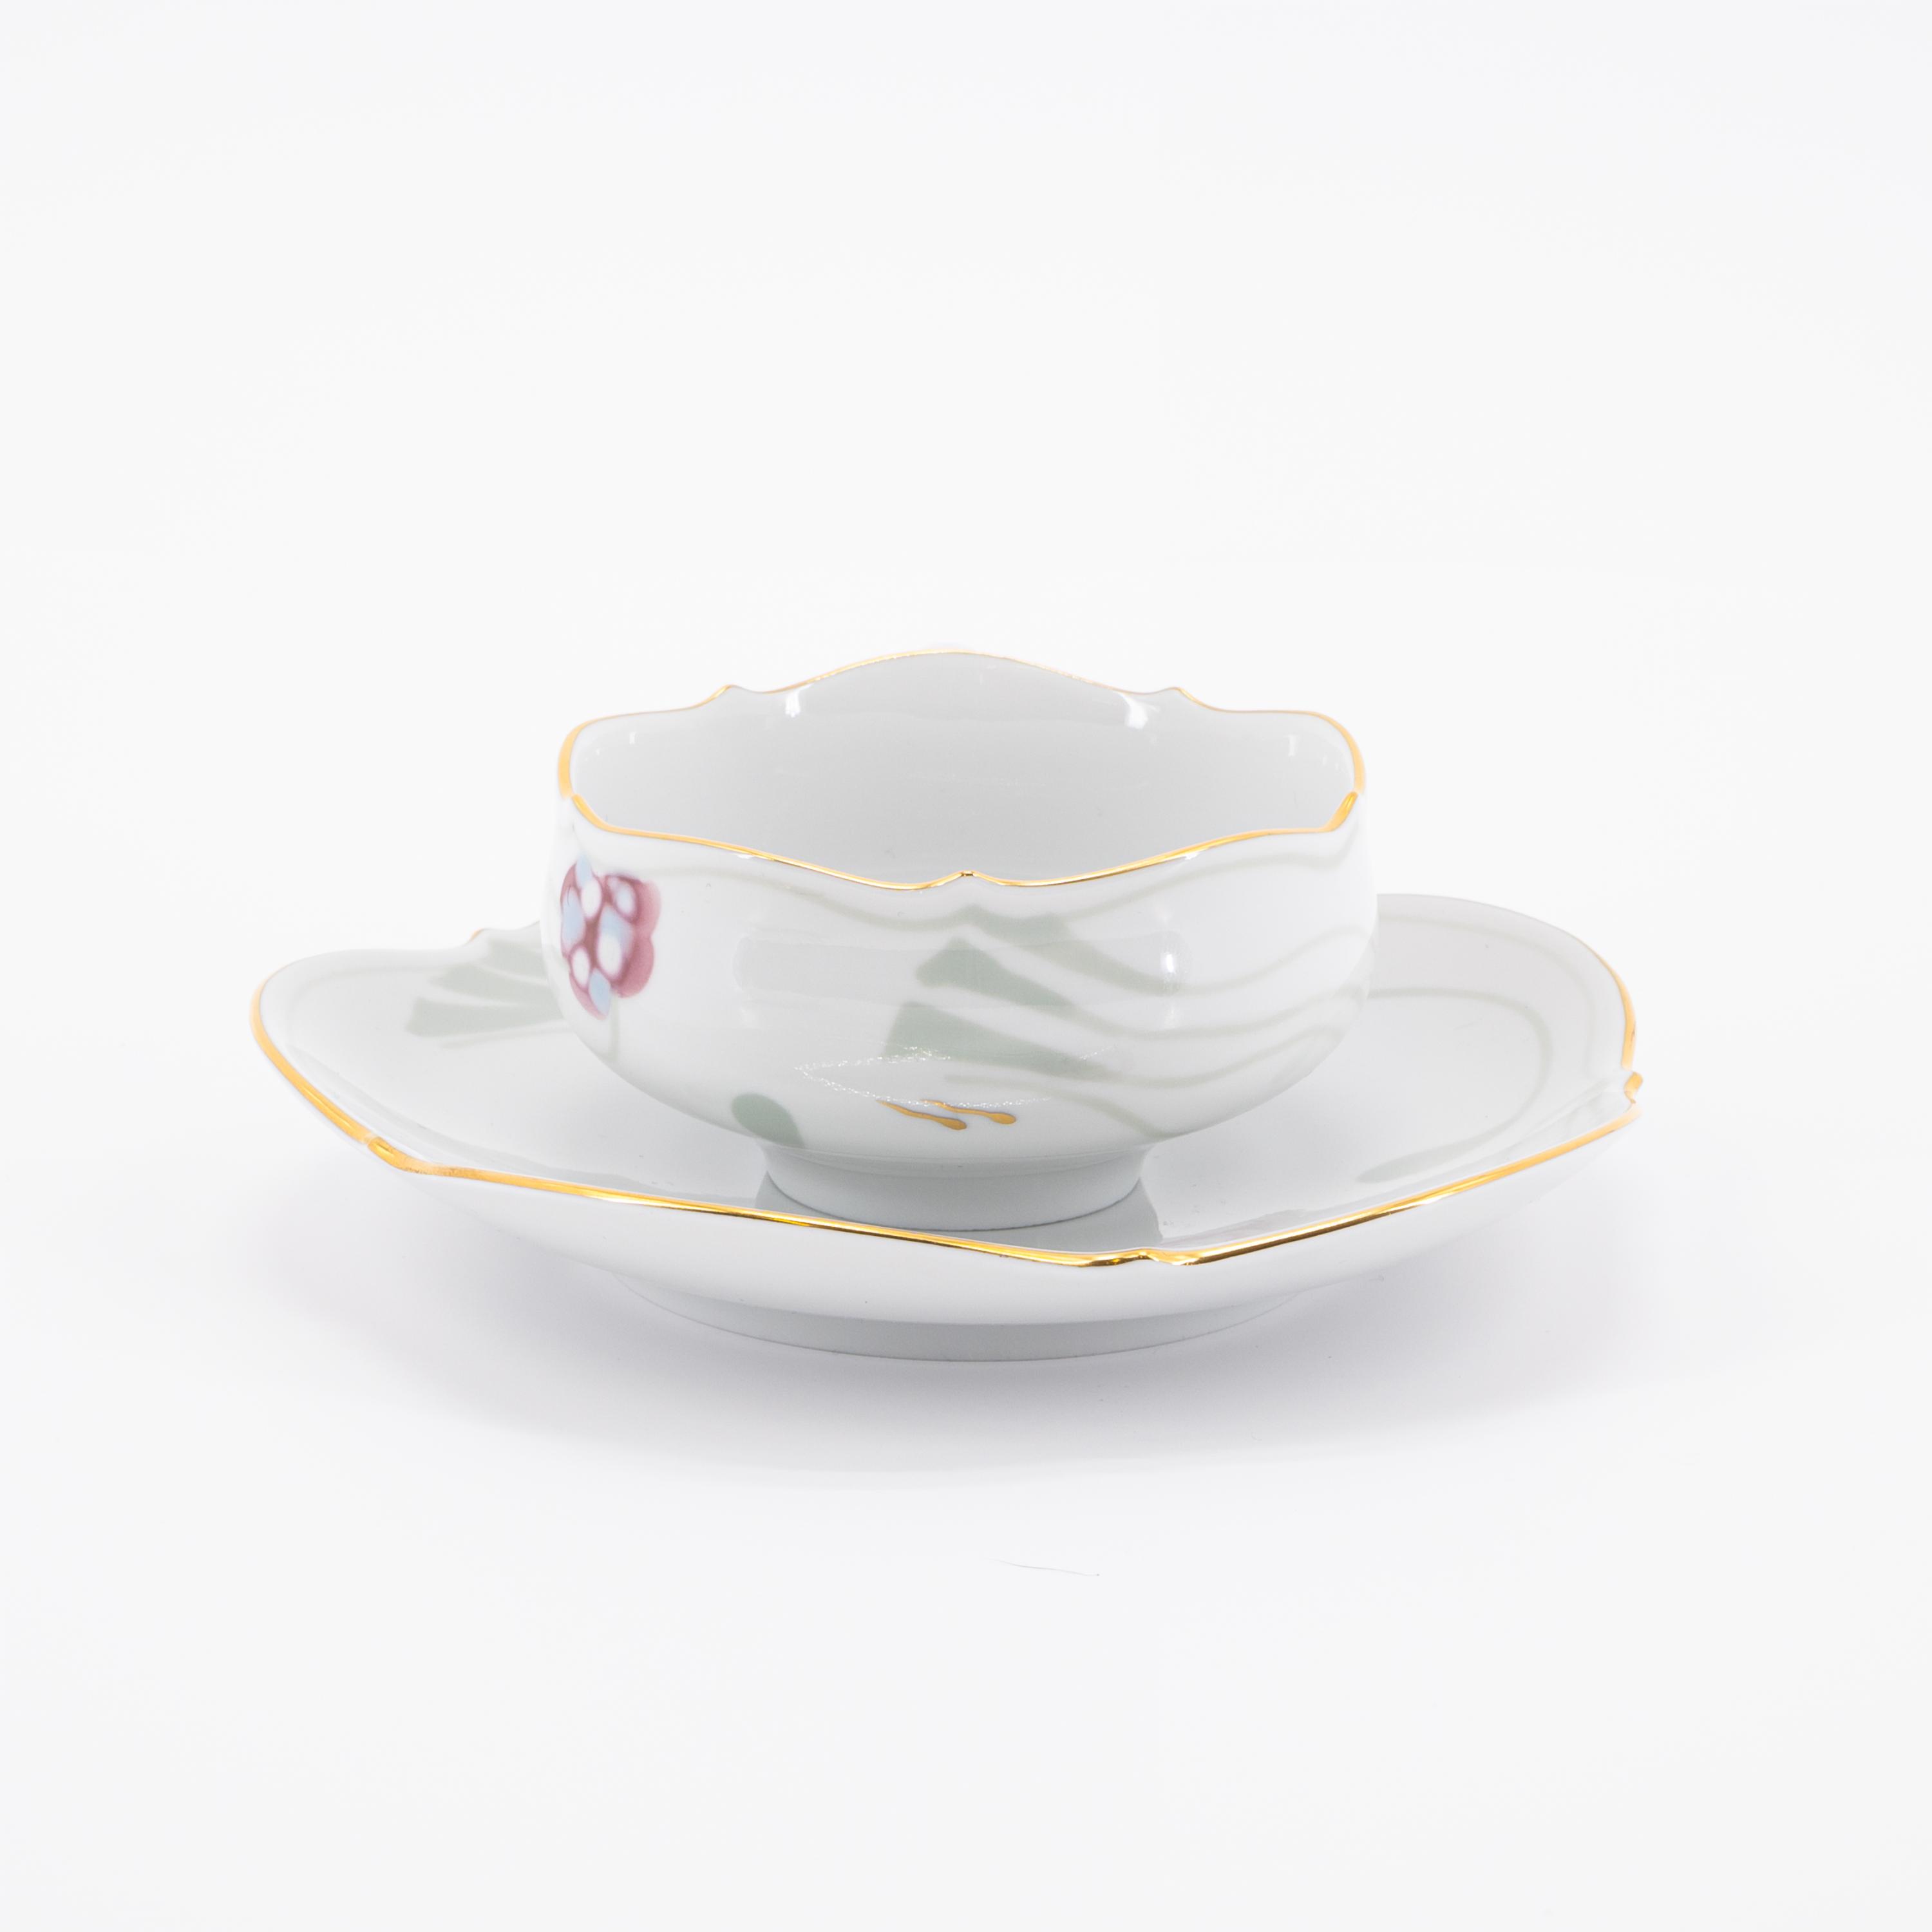 PORCELAIN TEA SERVICE FOR SIX IN THE 'LARGE CUT-OUT' SHAPE WITH 'WINDFLOWER' DECORATION - Image 4 of 18